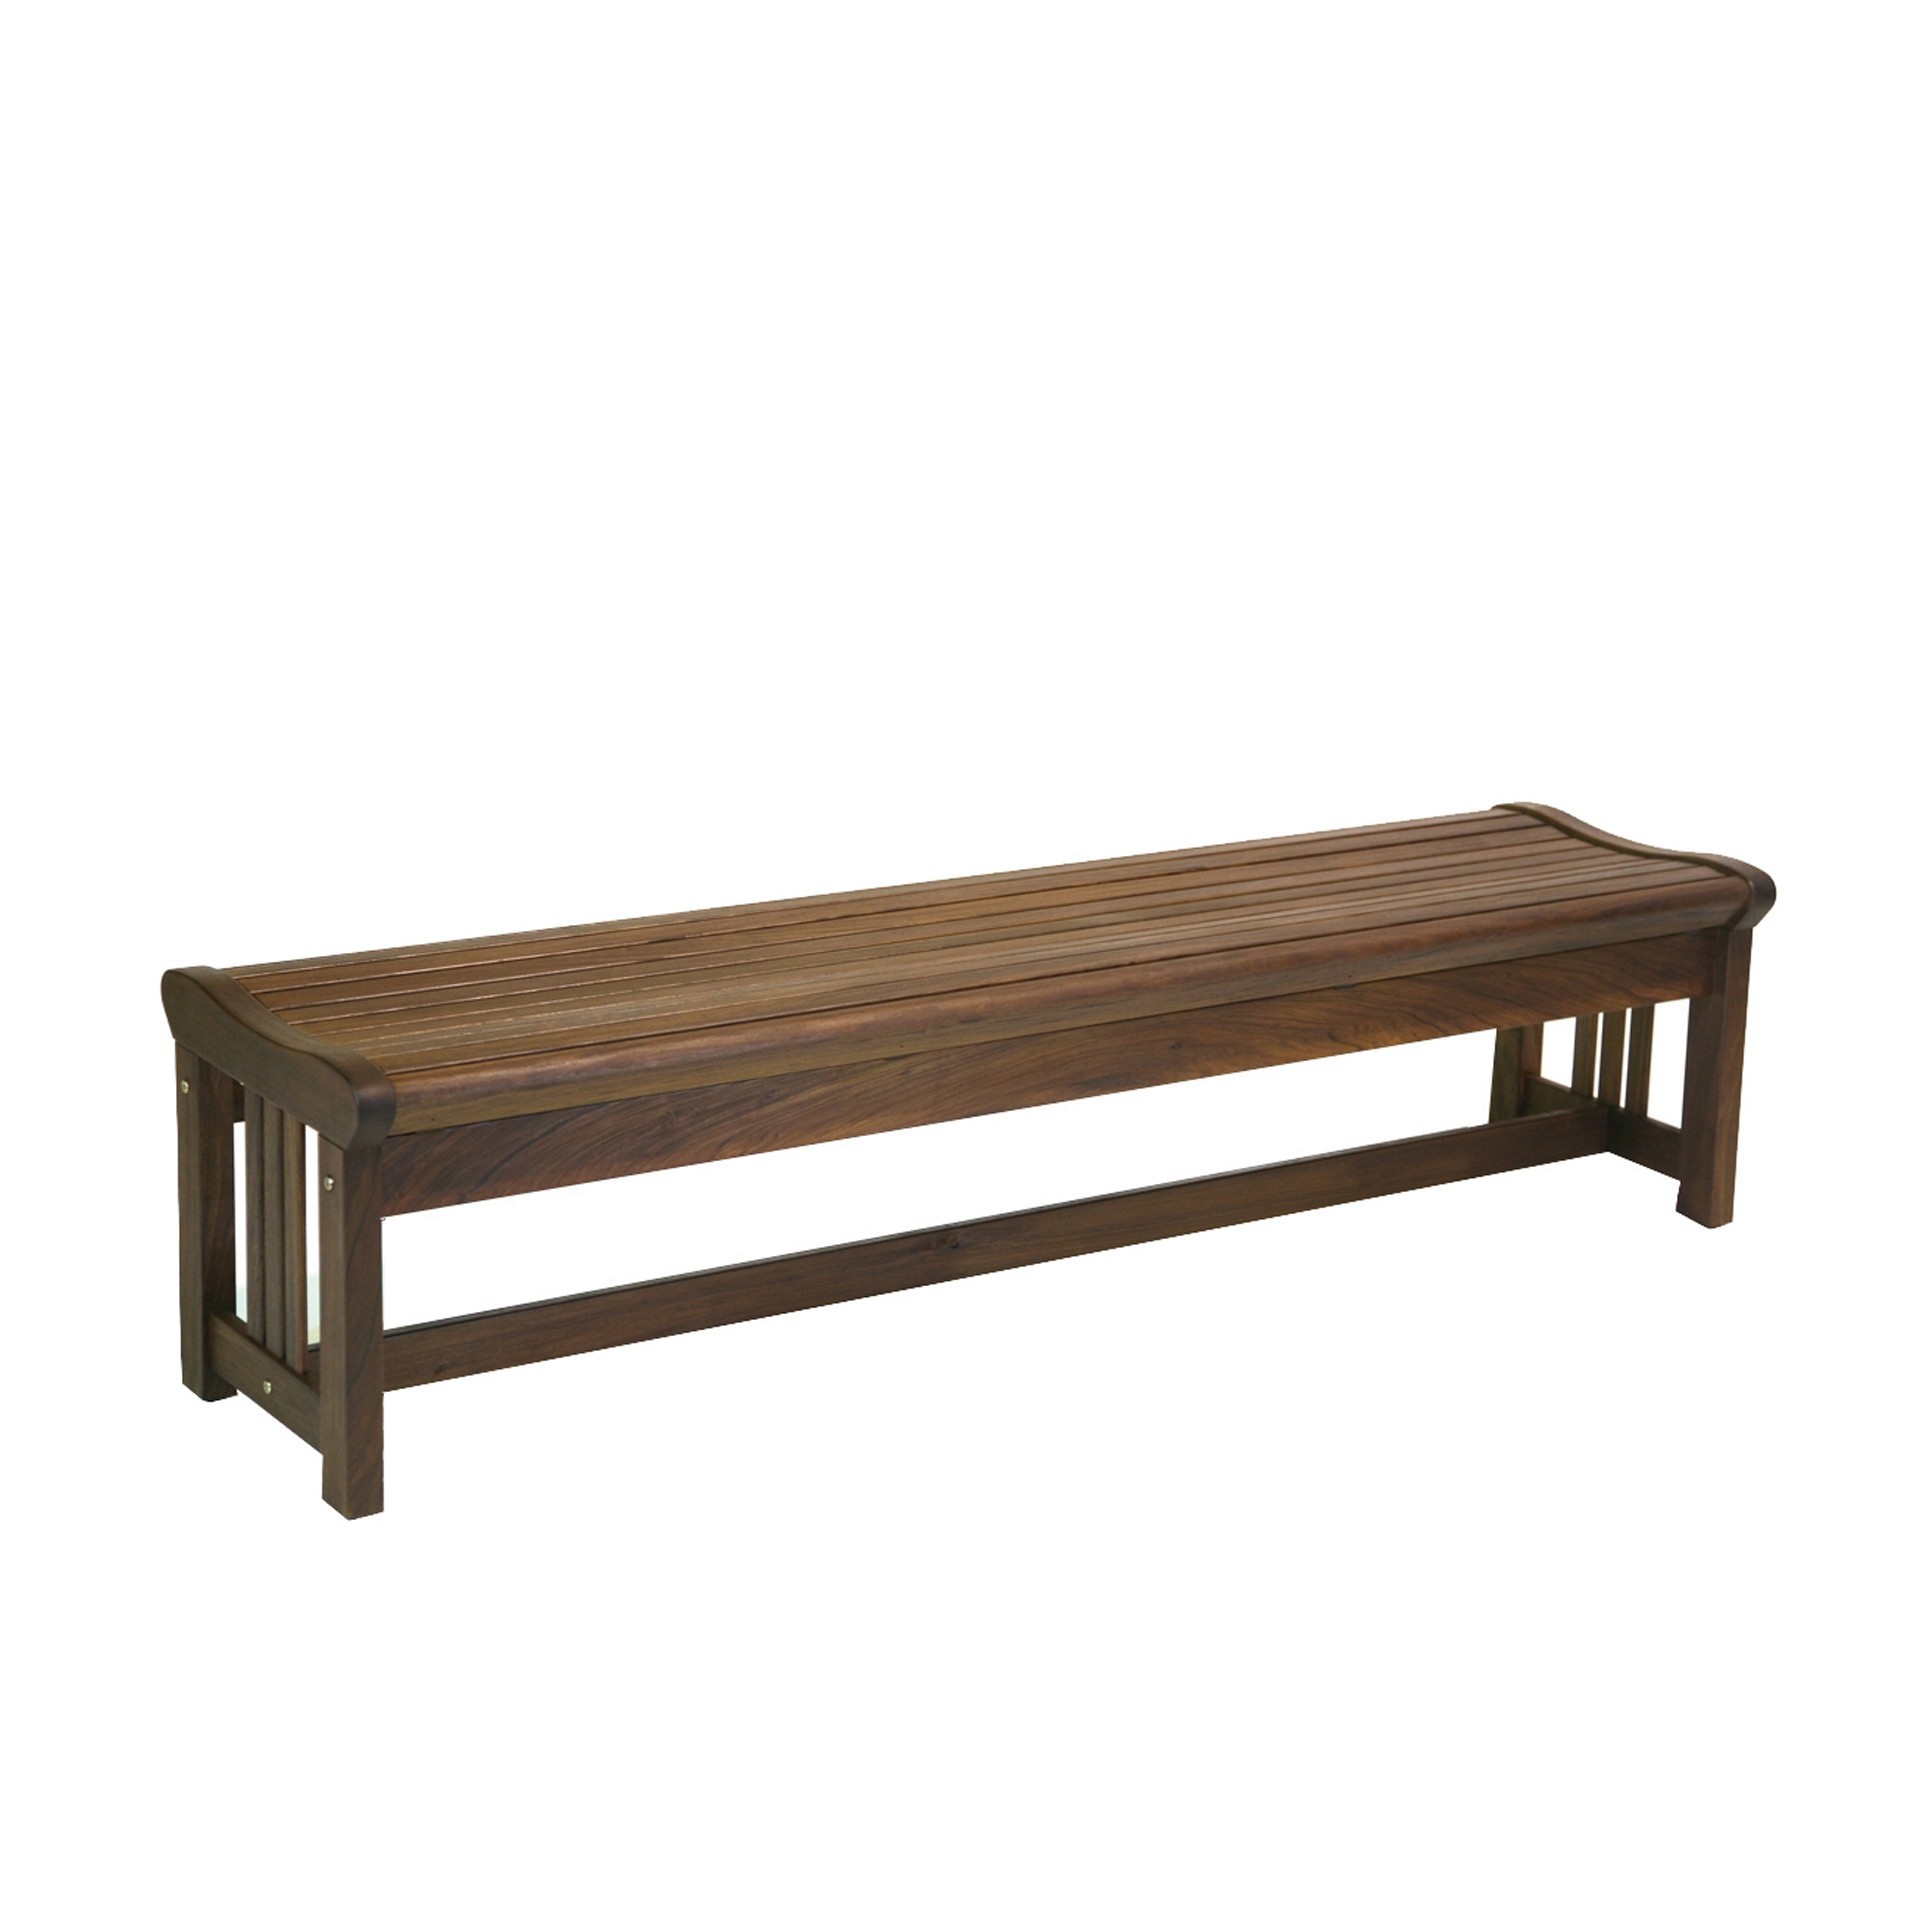 Lincoln backless bench from Hauser's Patio